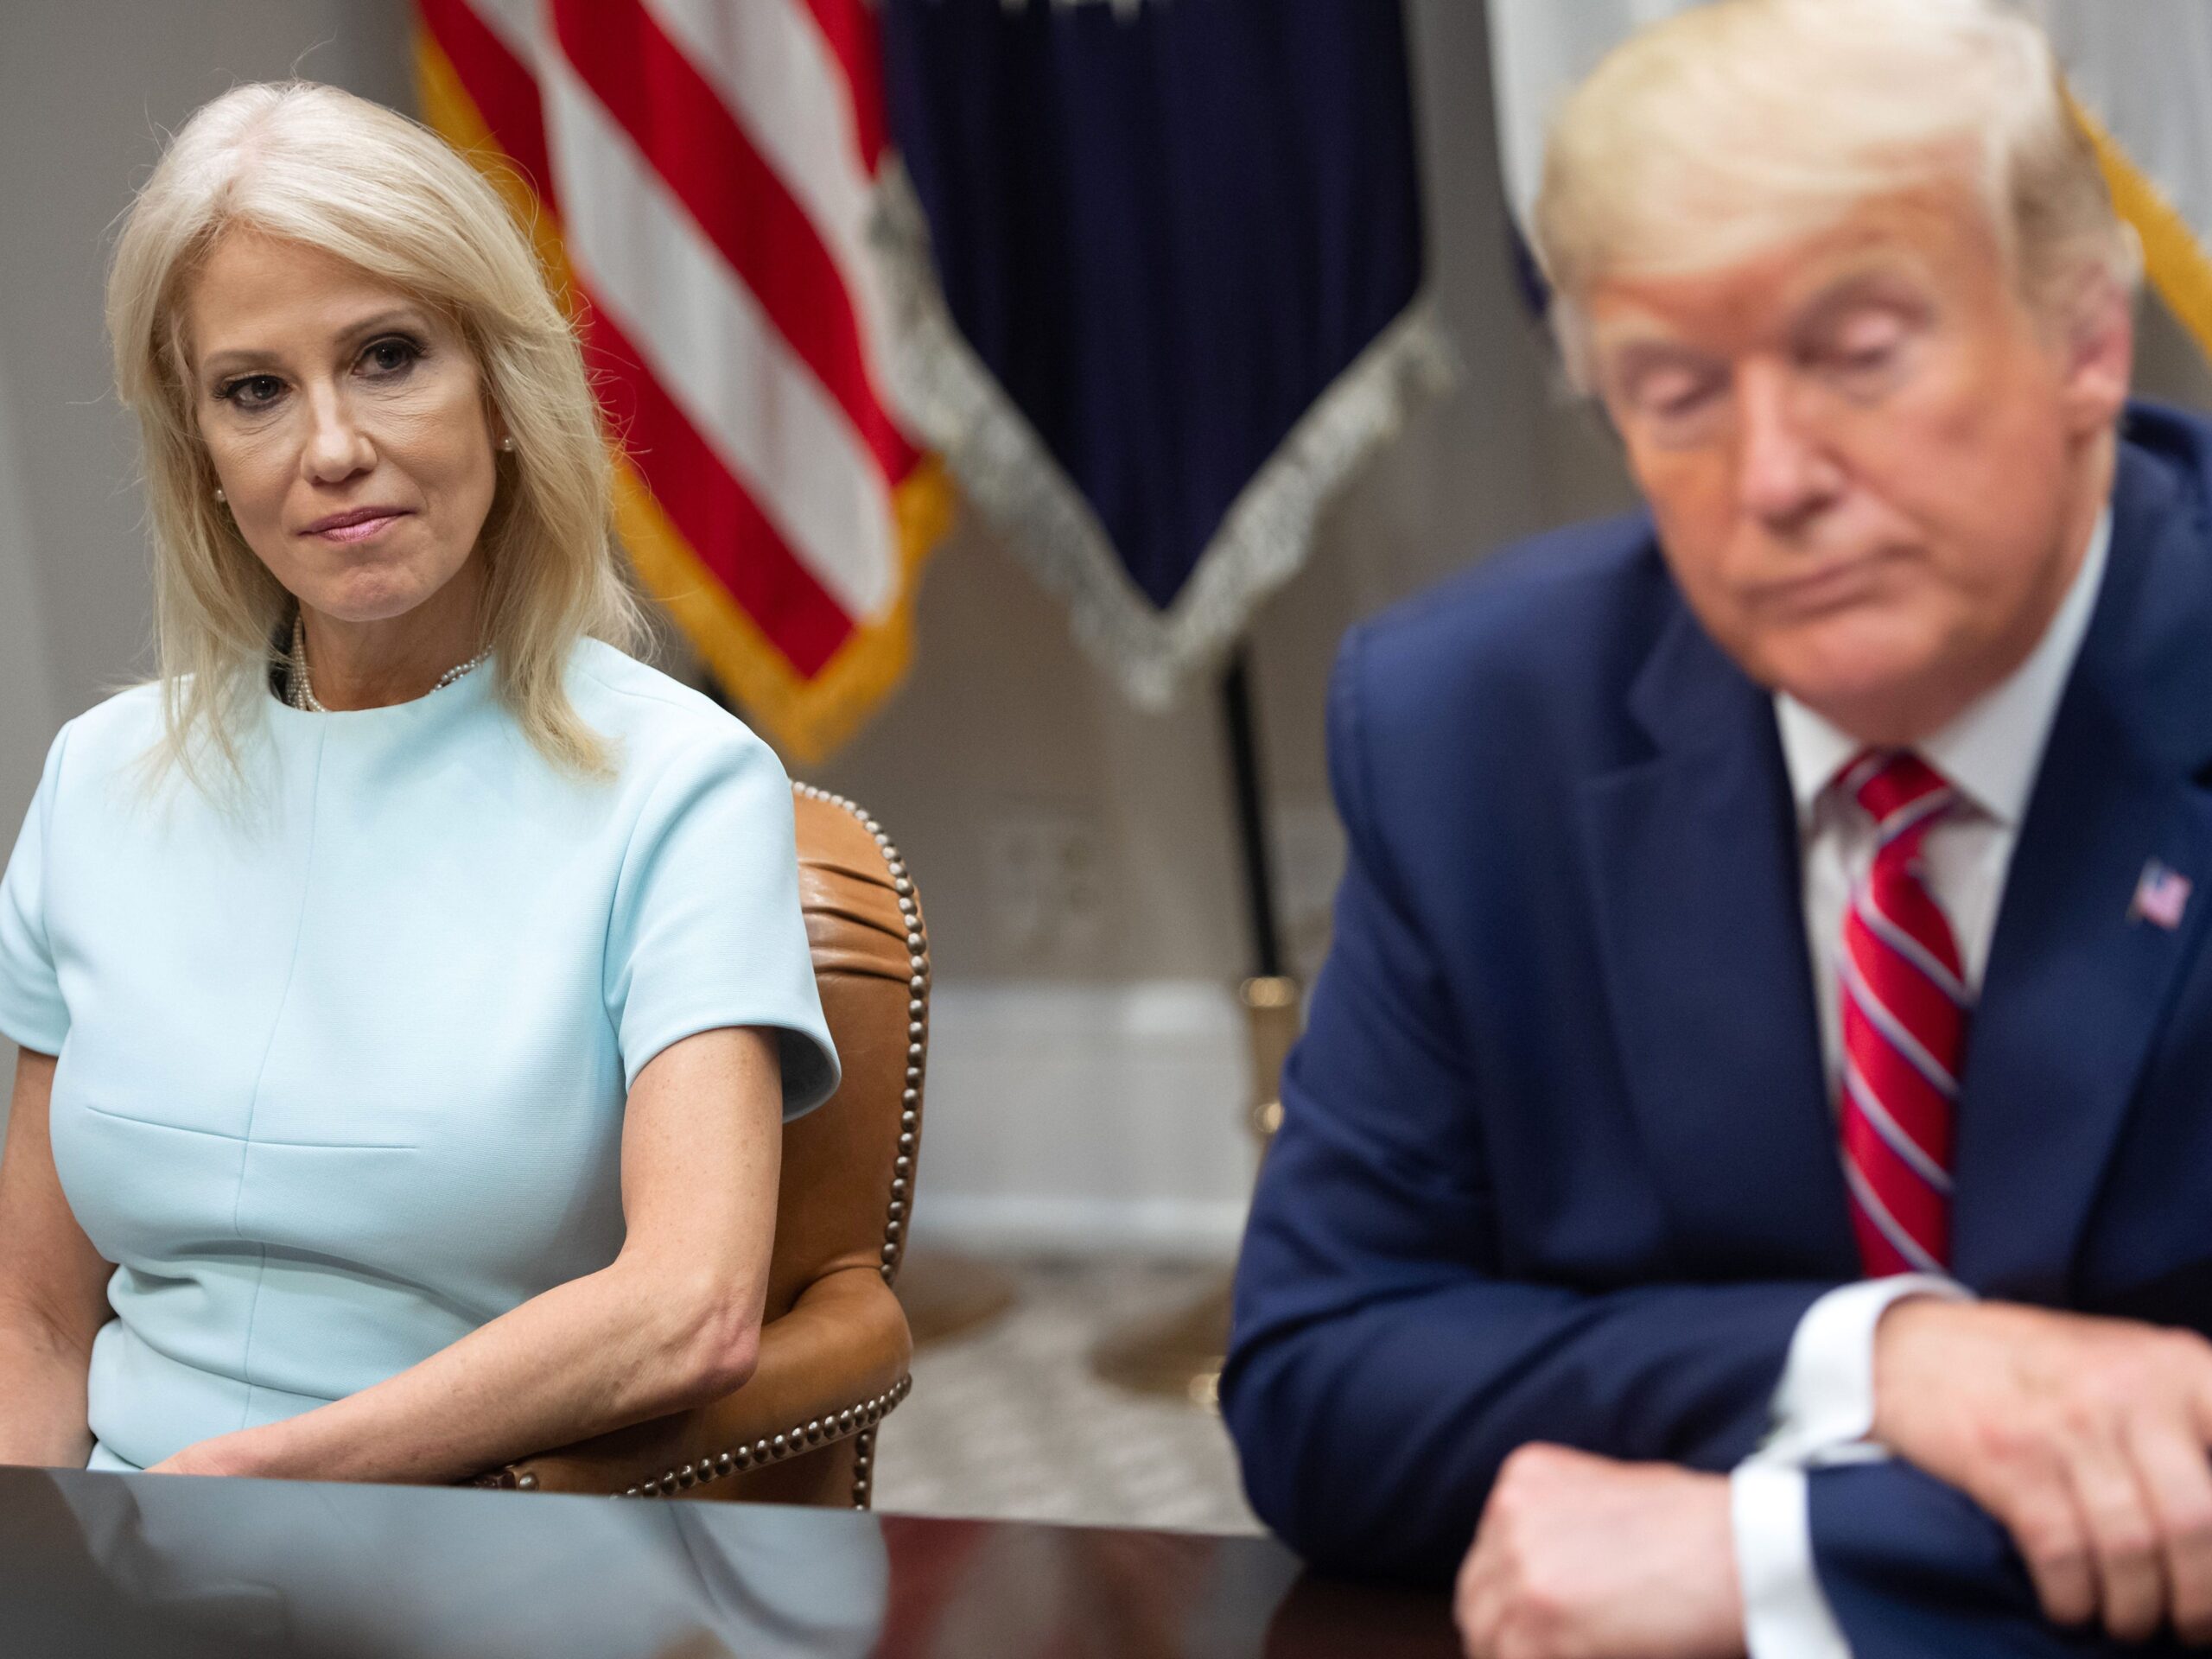 Kellyanne Conway and Donald Trump listen during a White House meeting on the opioid epidemic in 2019.